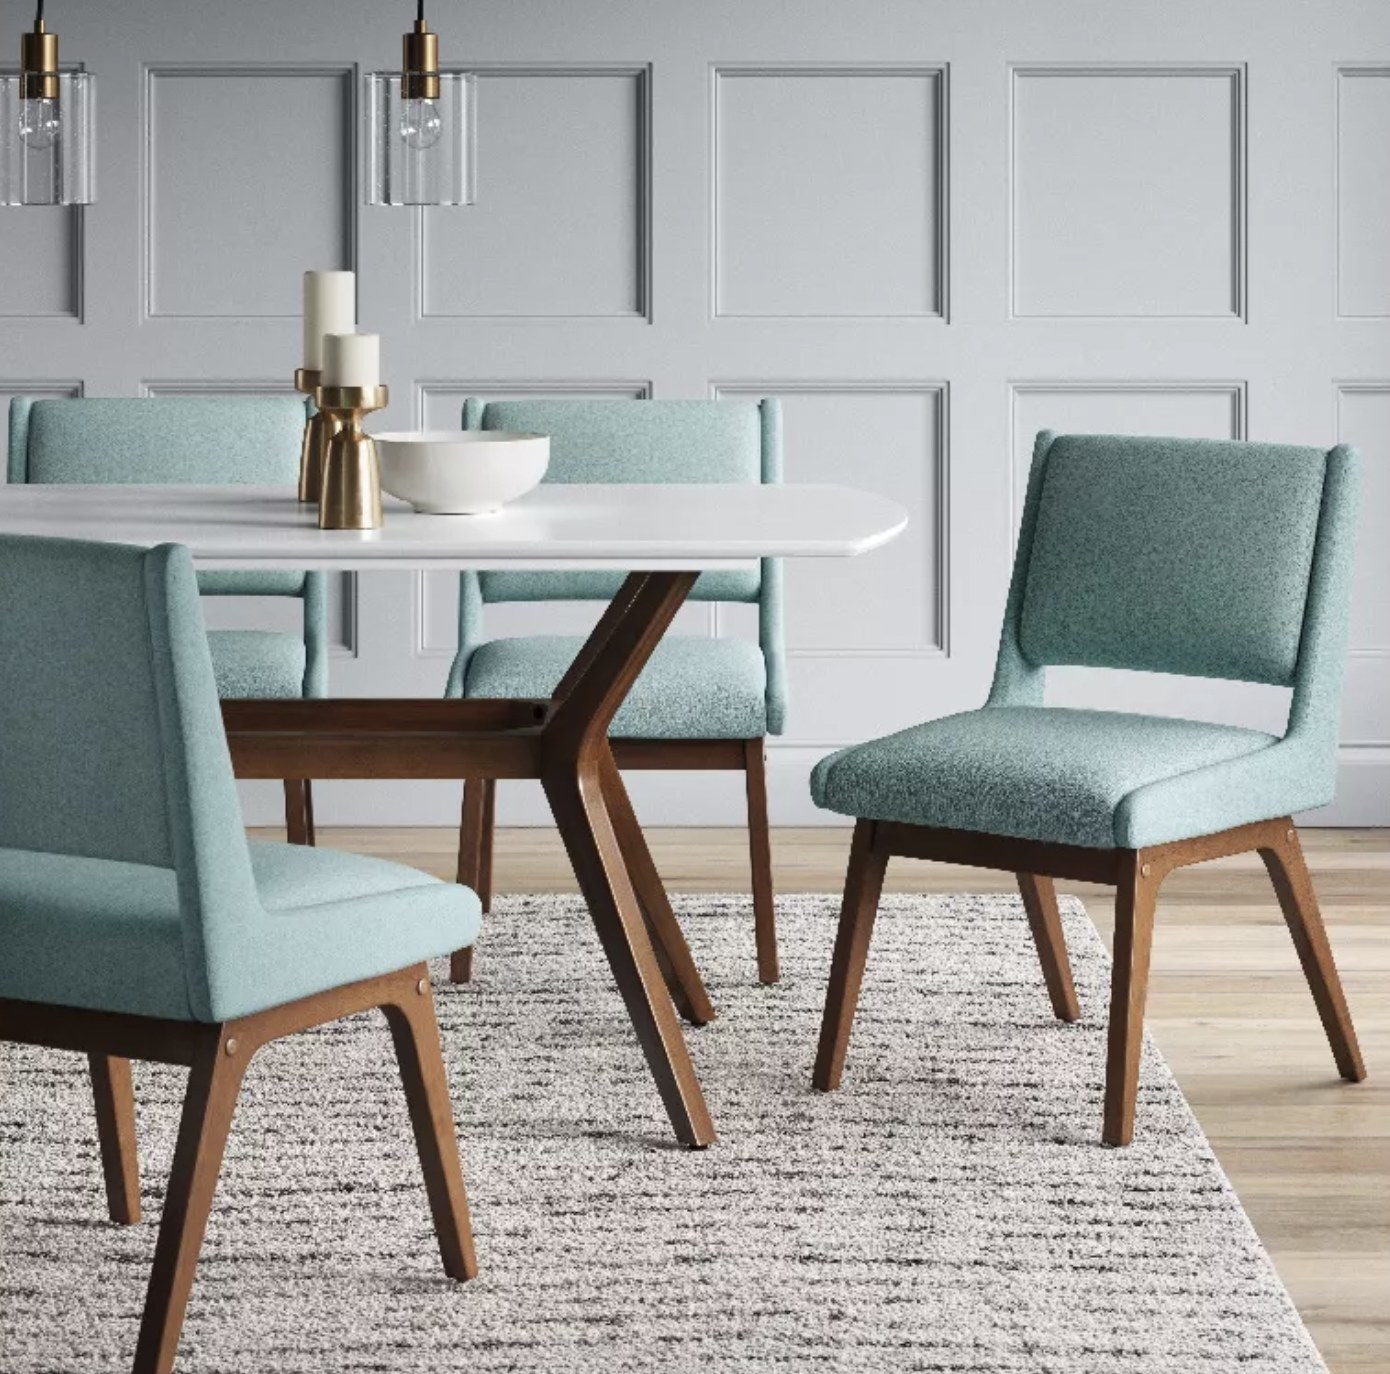 31 Pieces Of Furniture From Target That Not Only Look Expensive, But